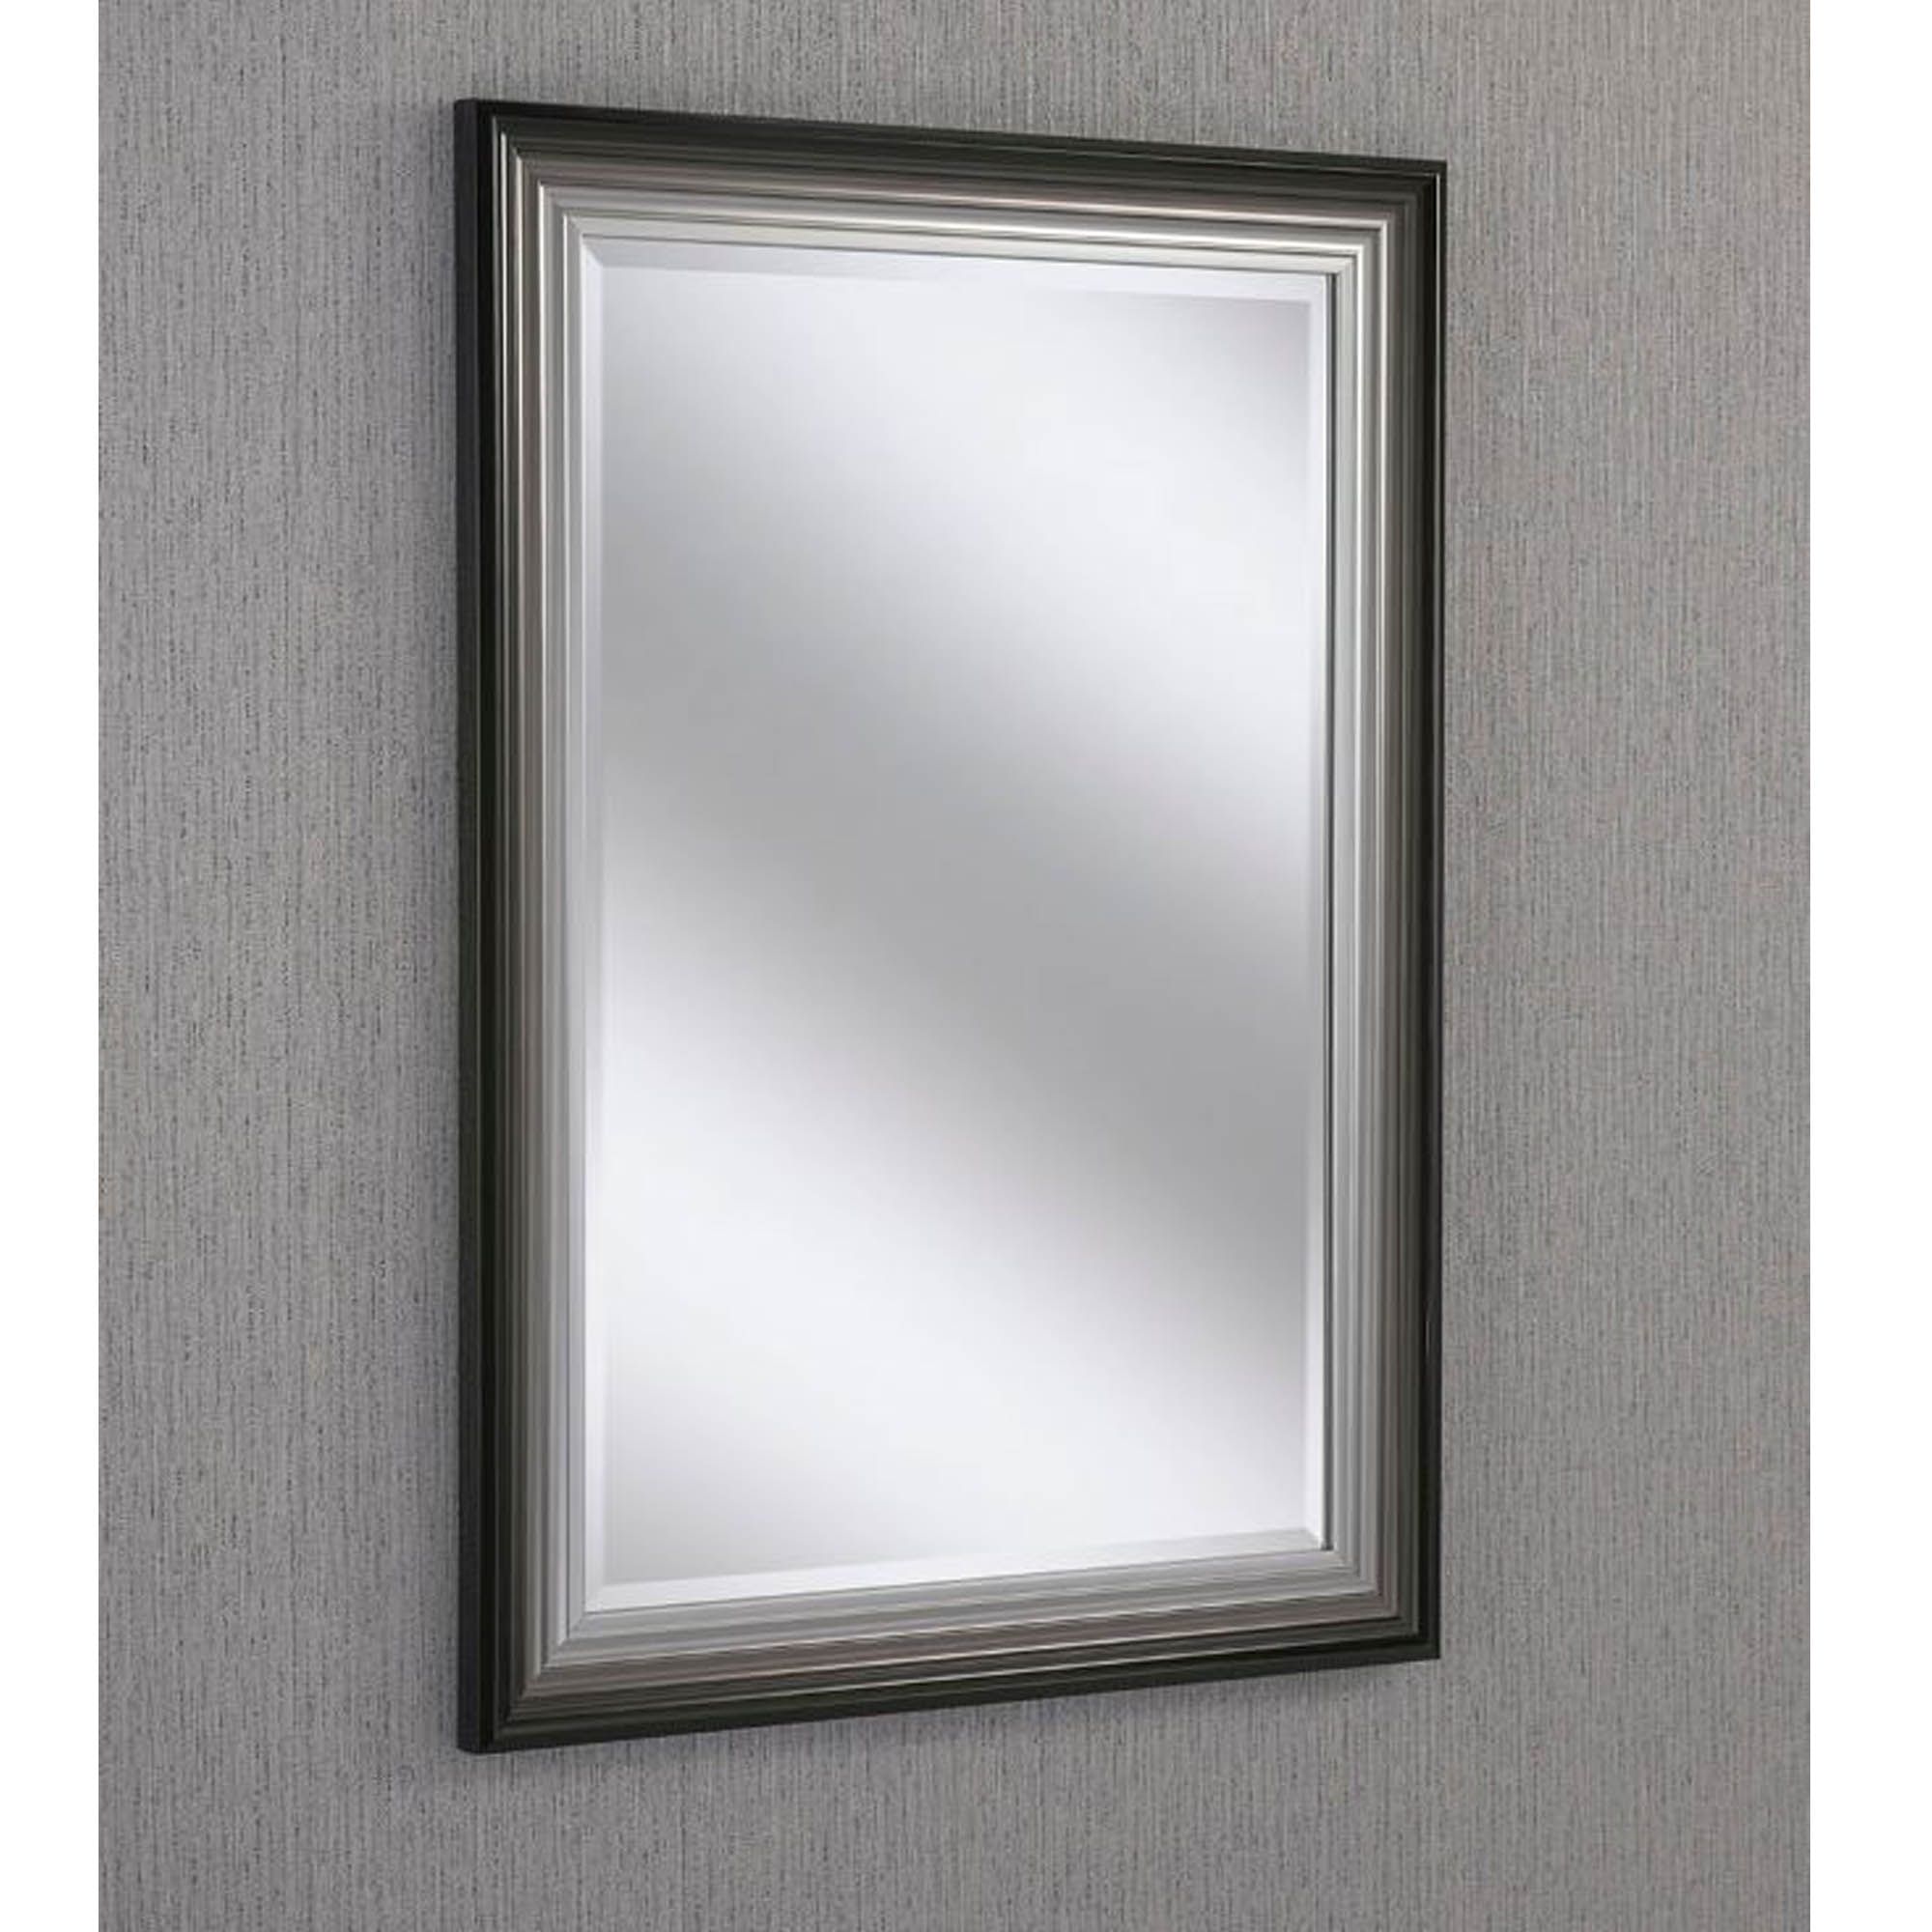 Rectangular Black/silver Beveled Contemporary Wall Mirror | Hd365 In Bevel Edge Rectangular Wall Mirrors (View 7 of 15)